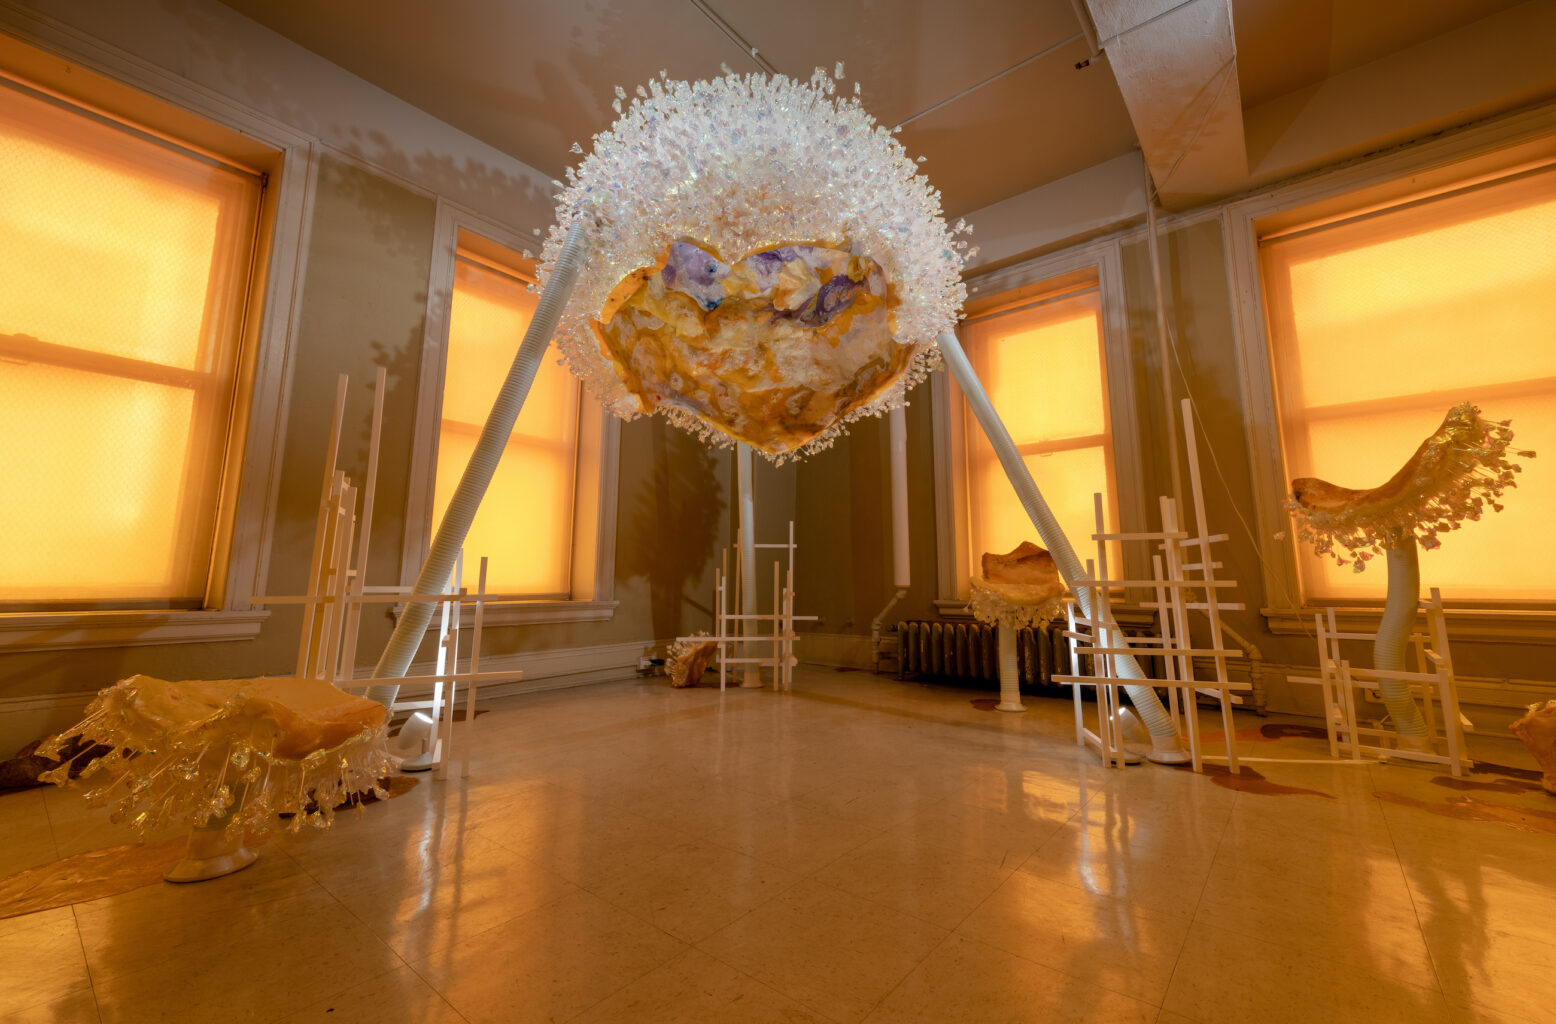 A amber-tinted room with four windows that seem to be glowing. A large sculpture looms in the corner in the room, like a white bedazzled alien on two legs with a round body. There are mushroom-like smaller sculptures that surround it, also bedazzled with shiny hanging objects.